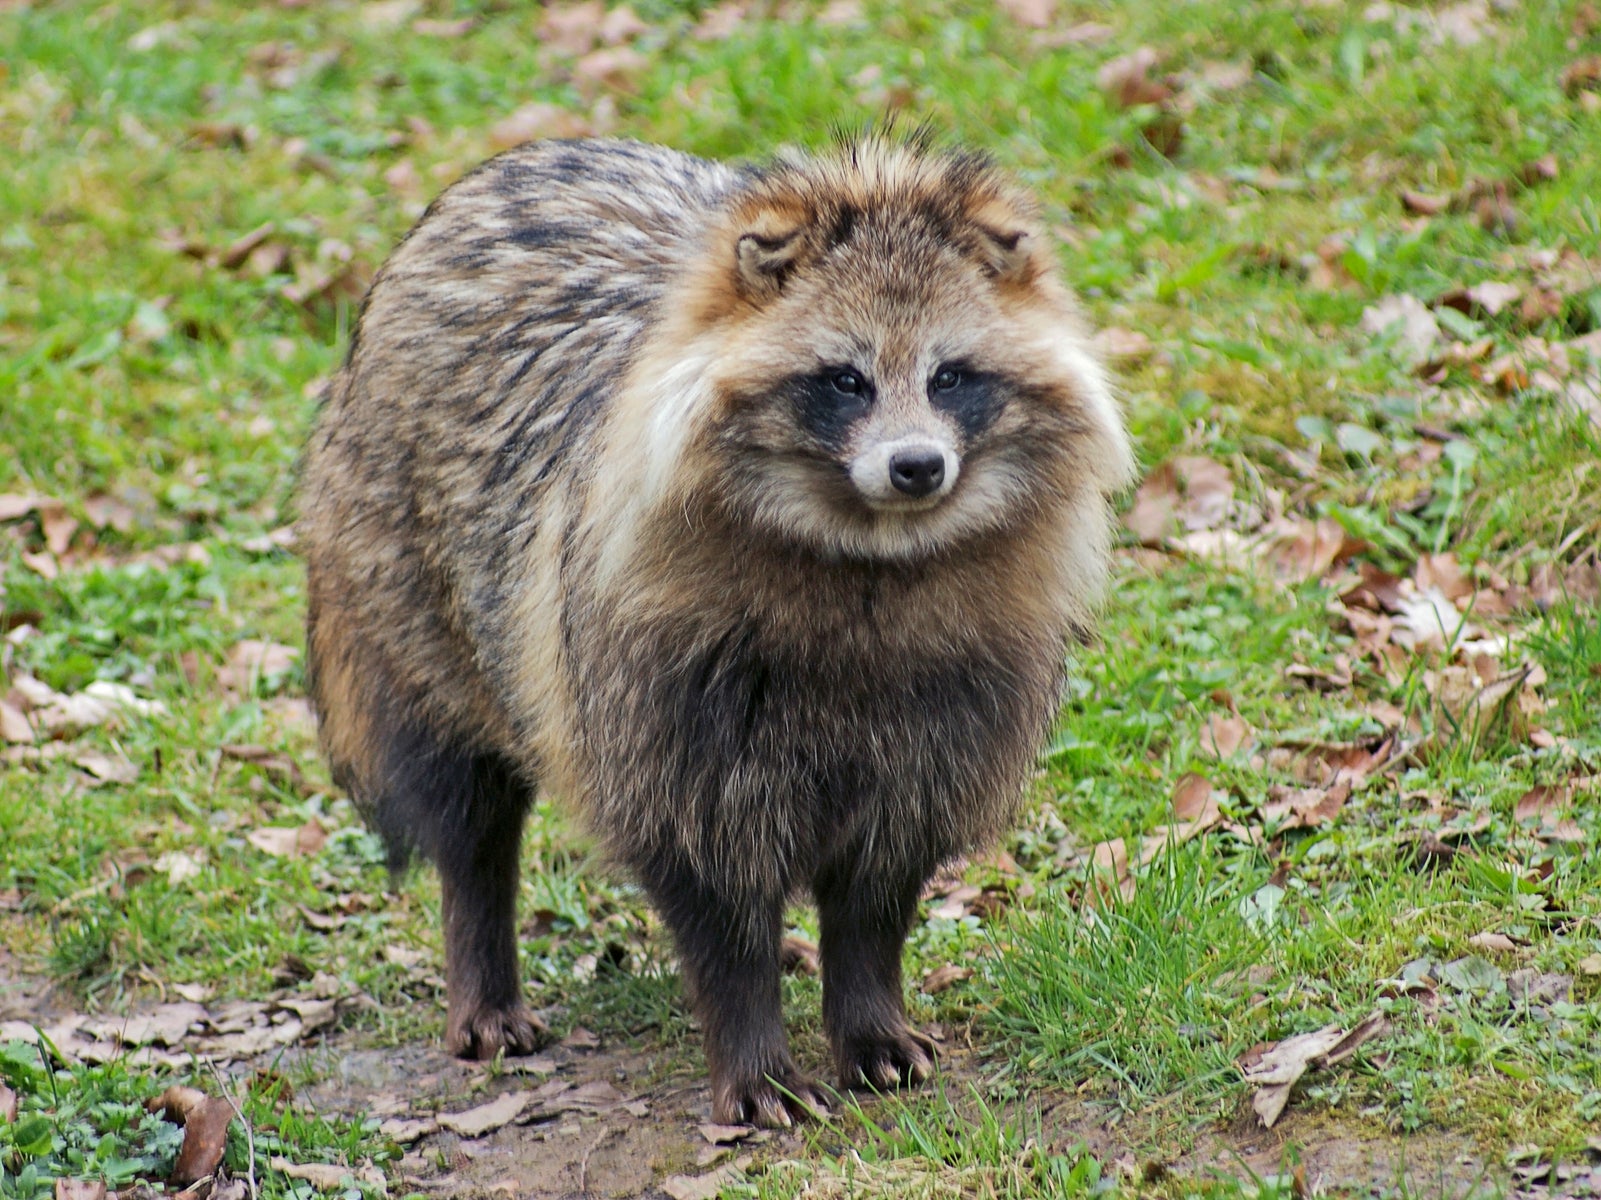 Raccoon Dog in natural ambiance.